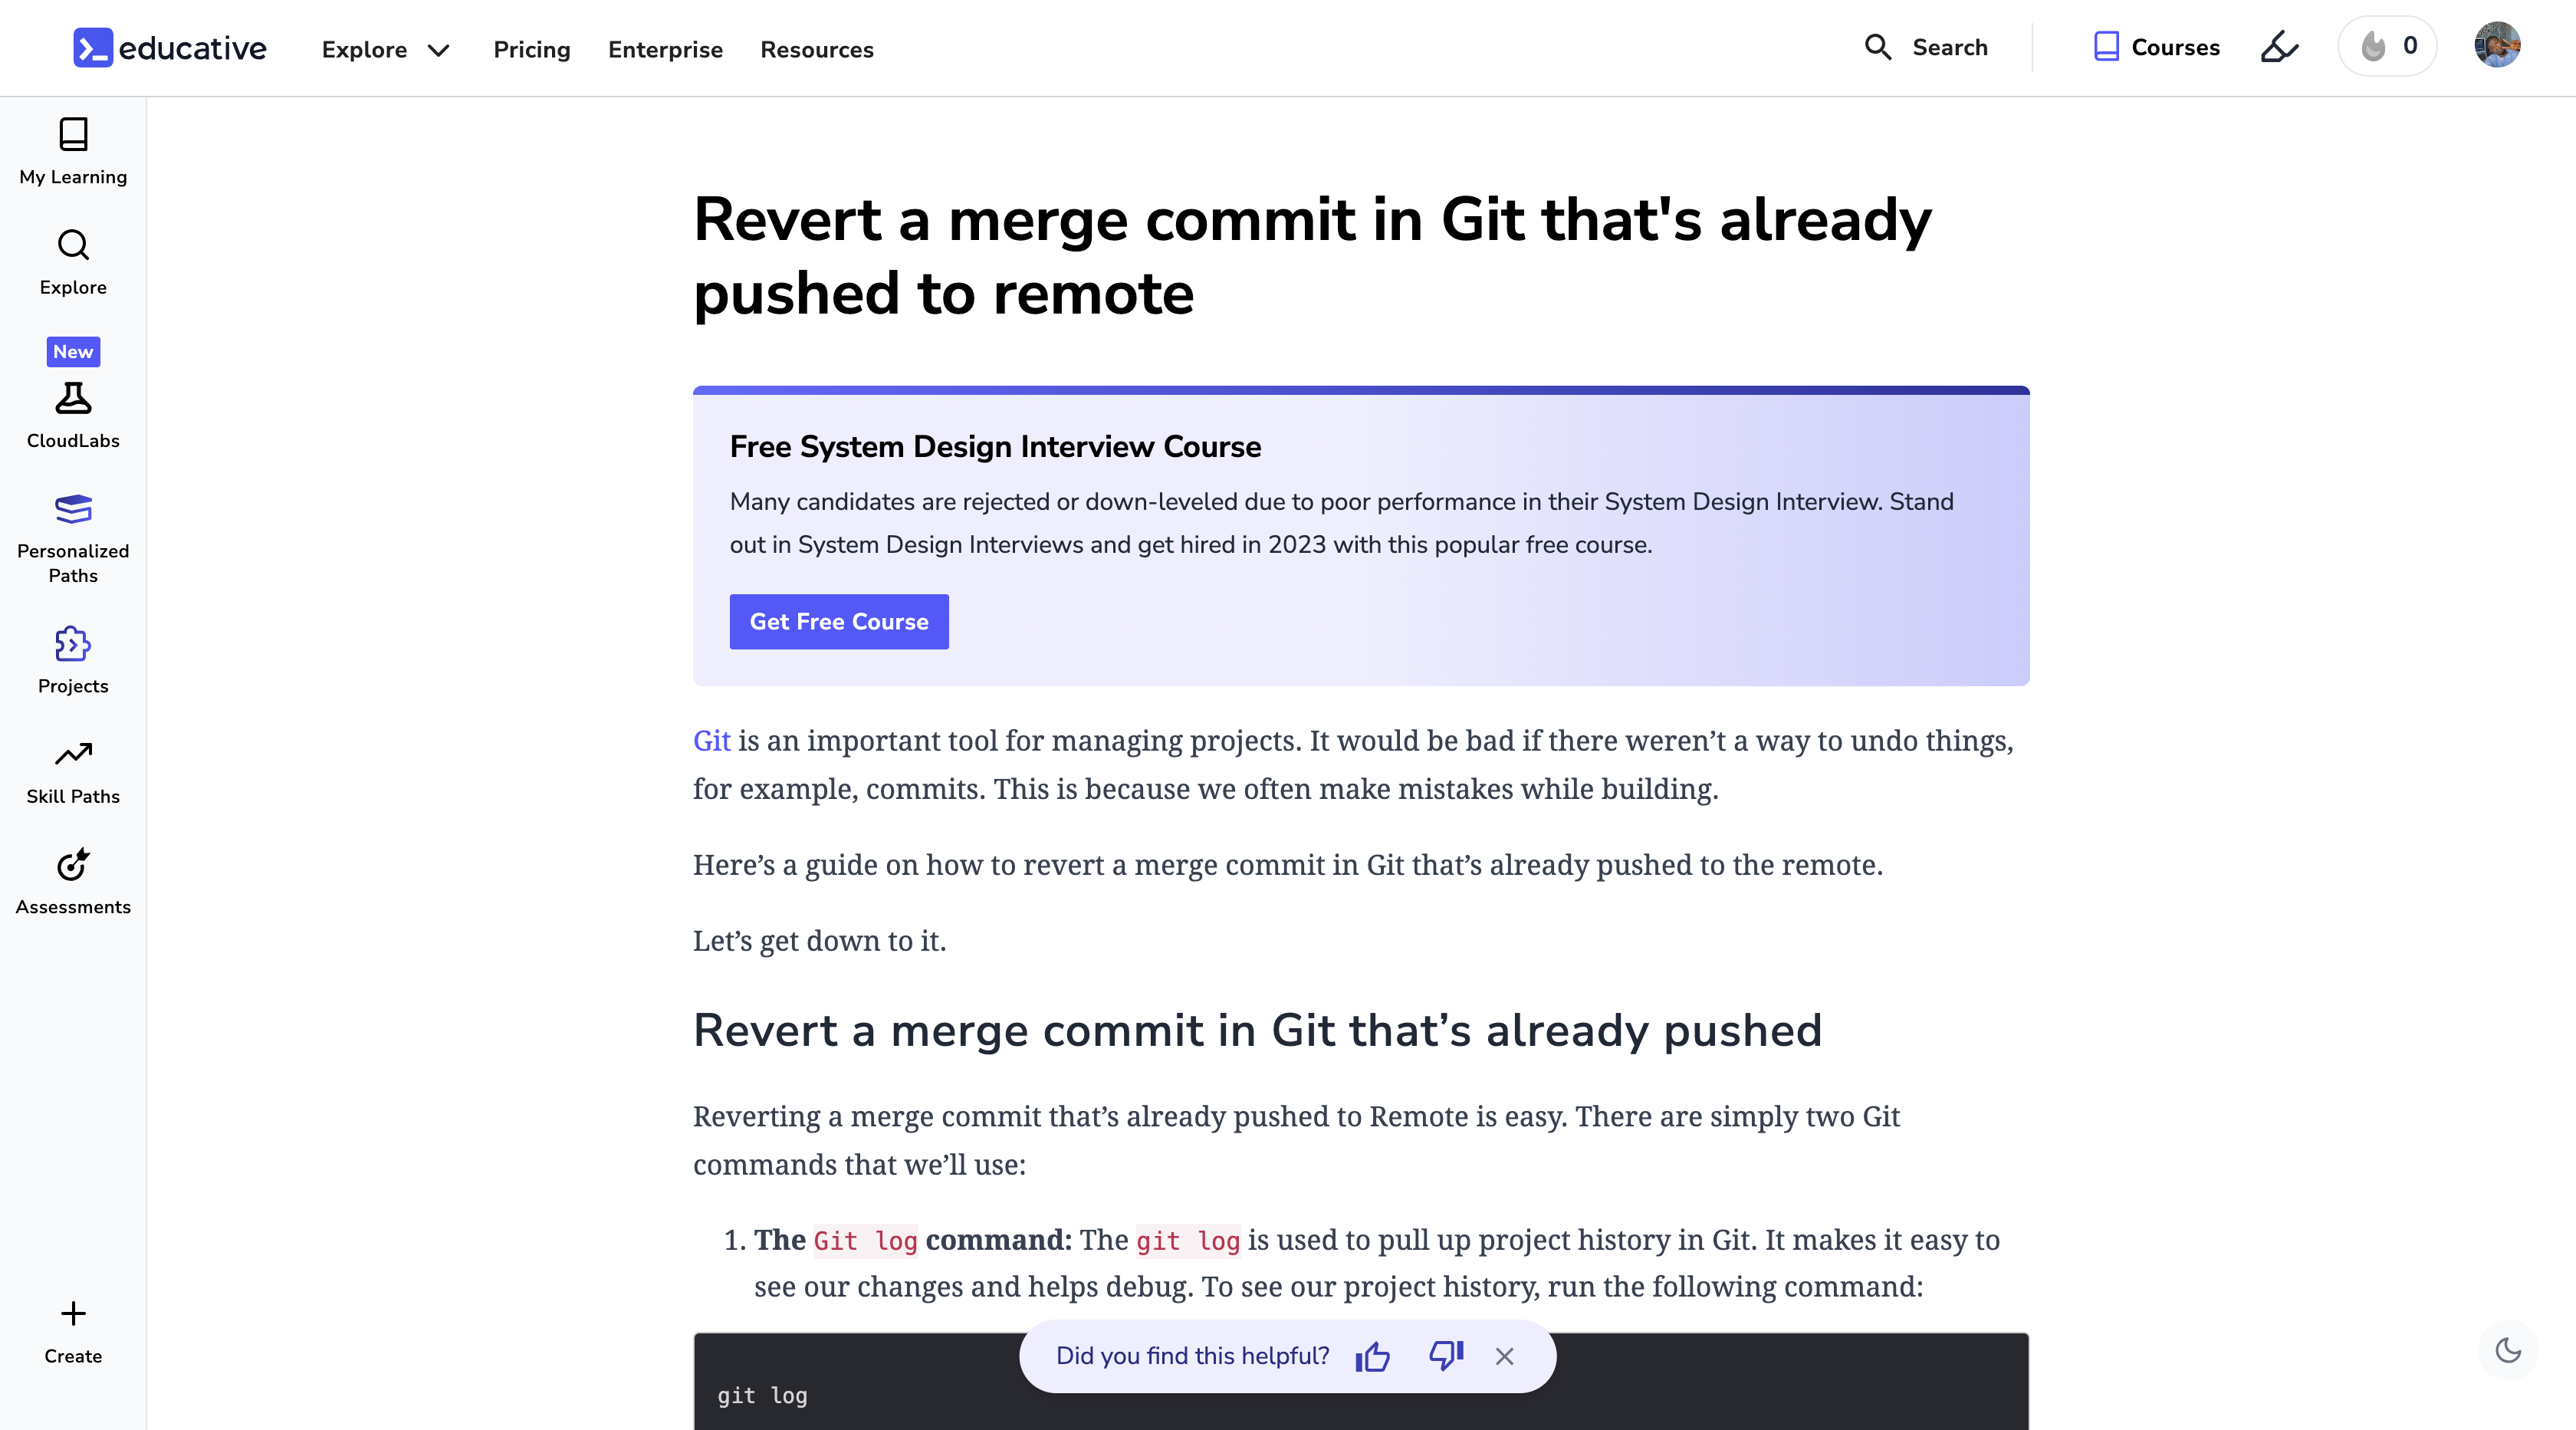 Revert a merge commit in Git that's already pushed to remote